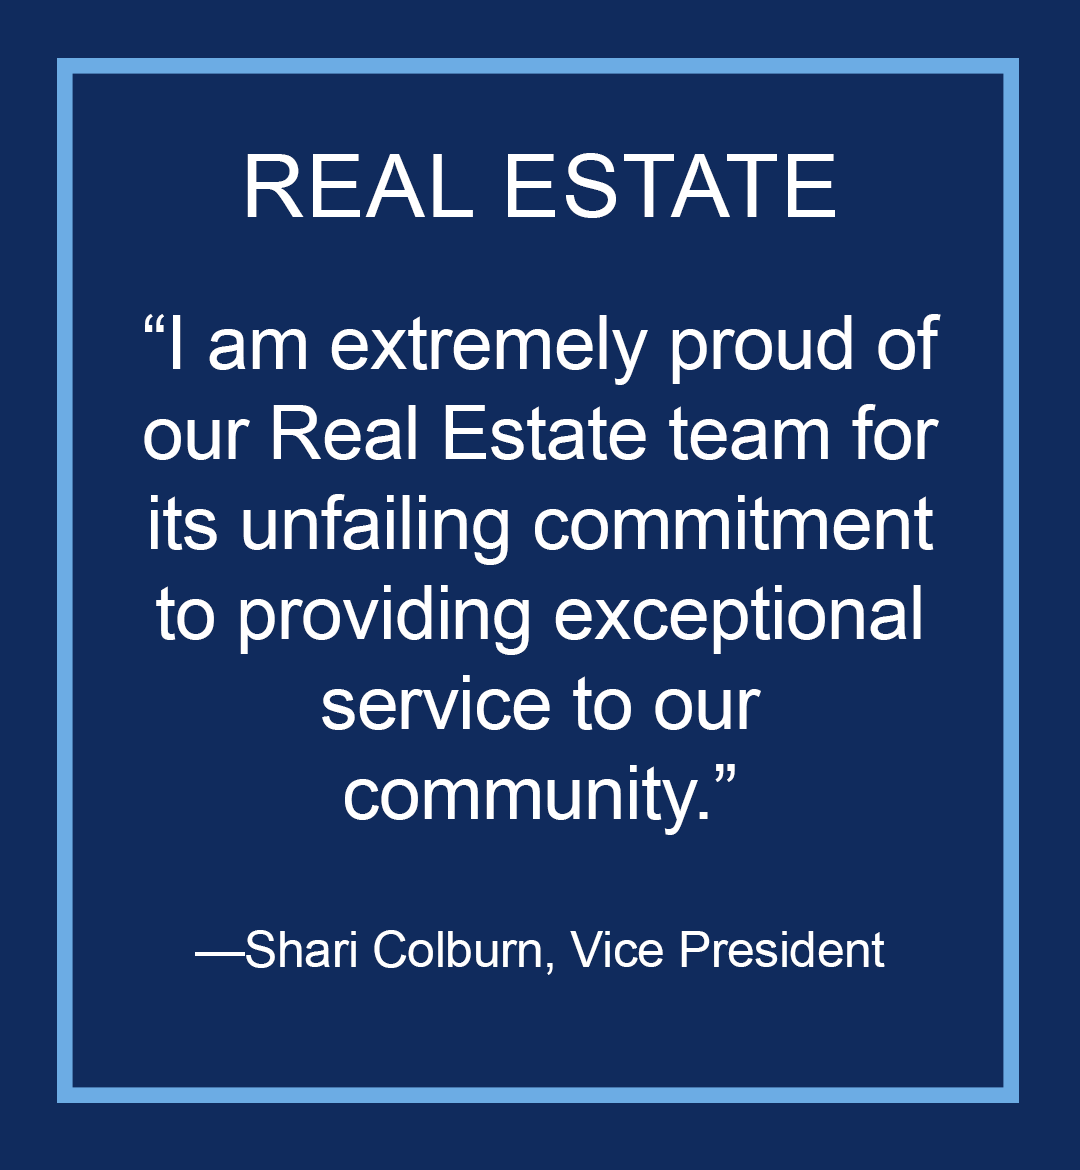 Image with text: Real Estate, "I am extremely proud of our Real Estate team for its unfailing commitment to providing exceptional service to our community," Shari Colburn, Vice President